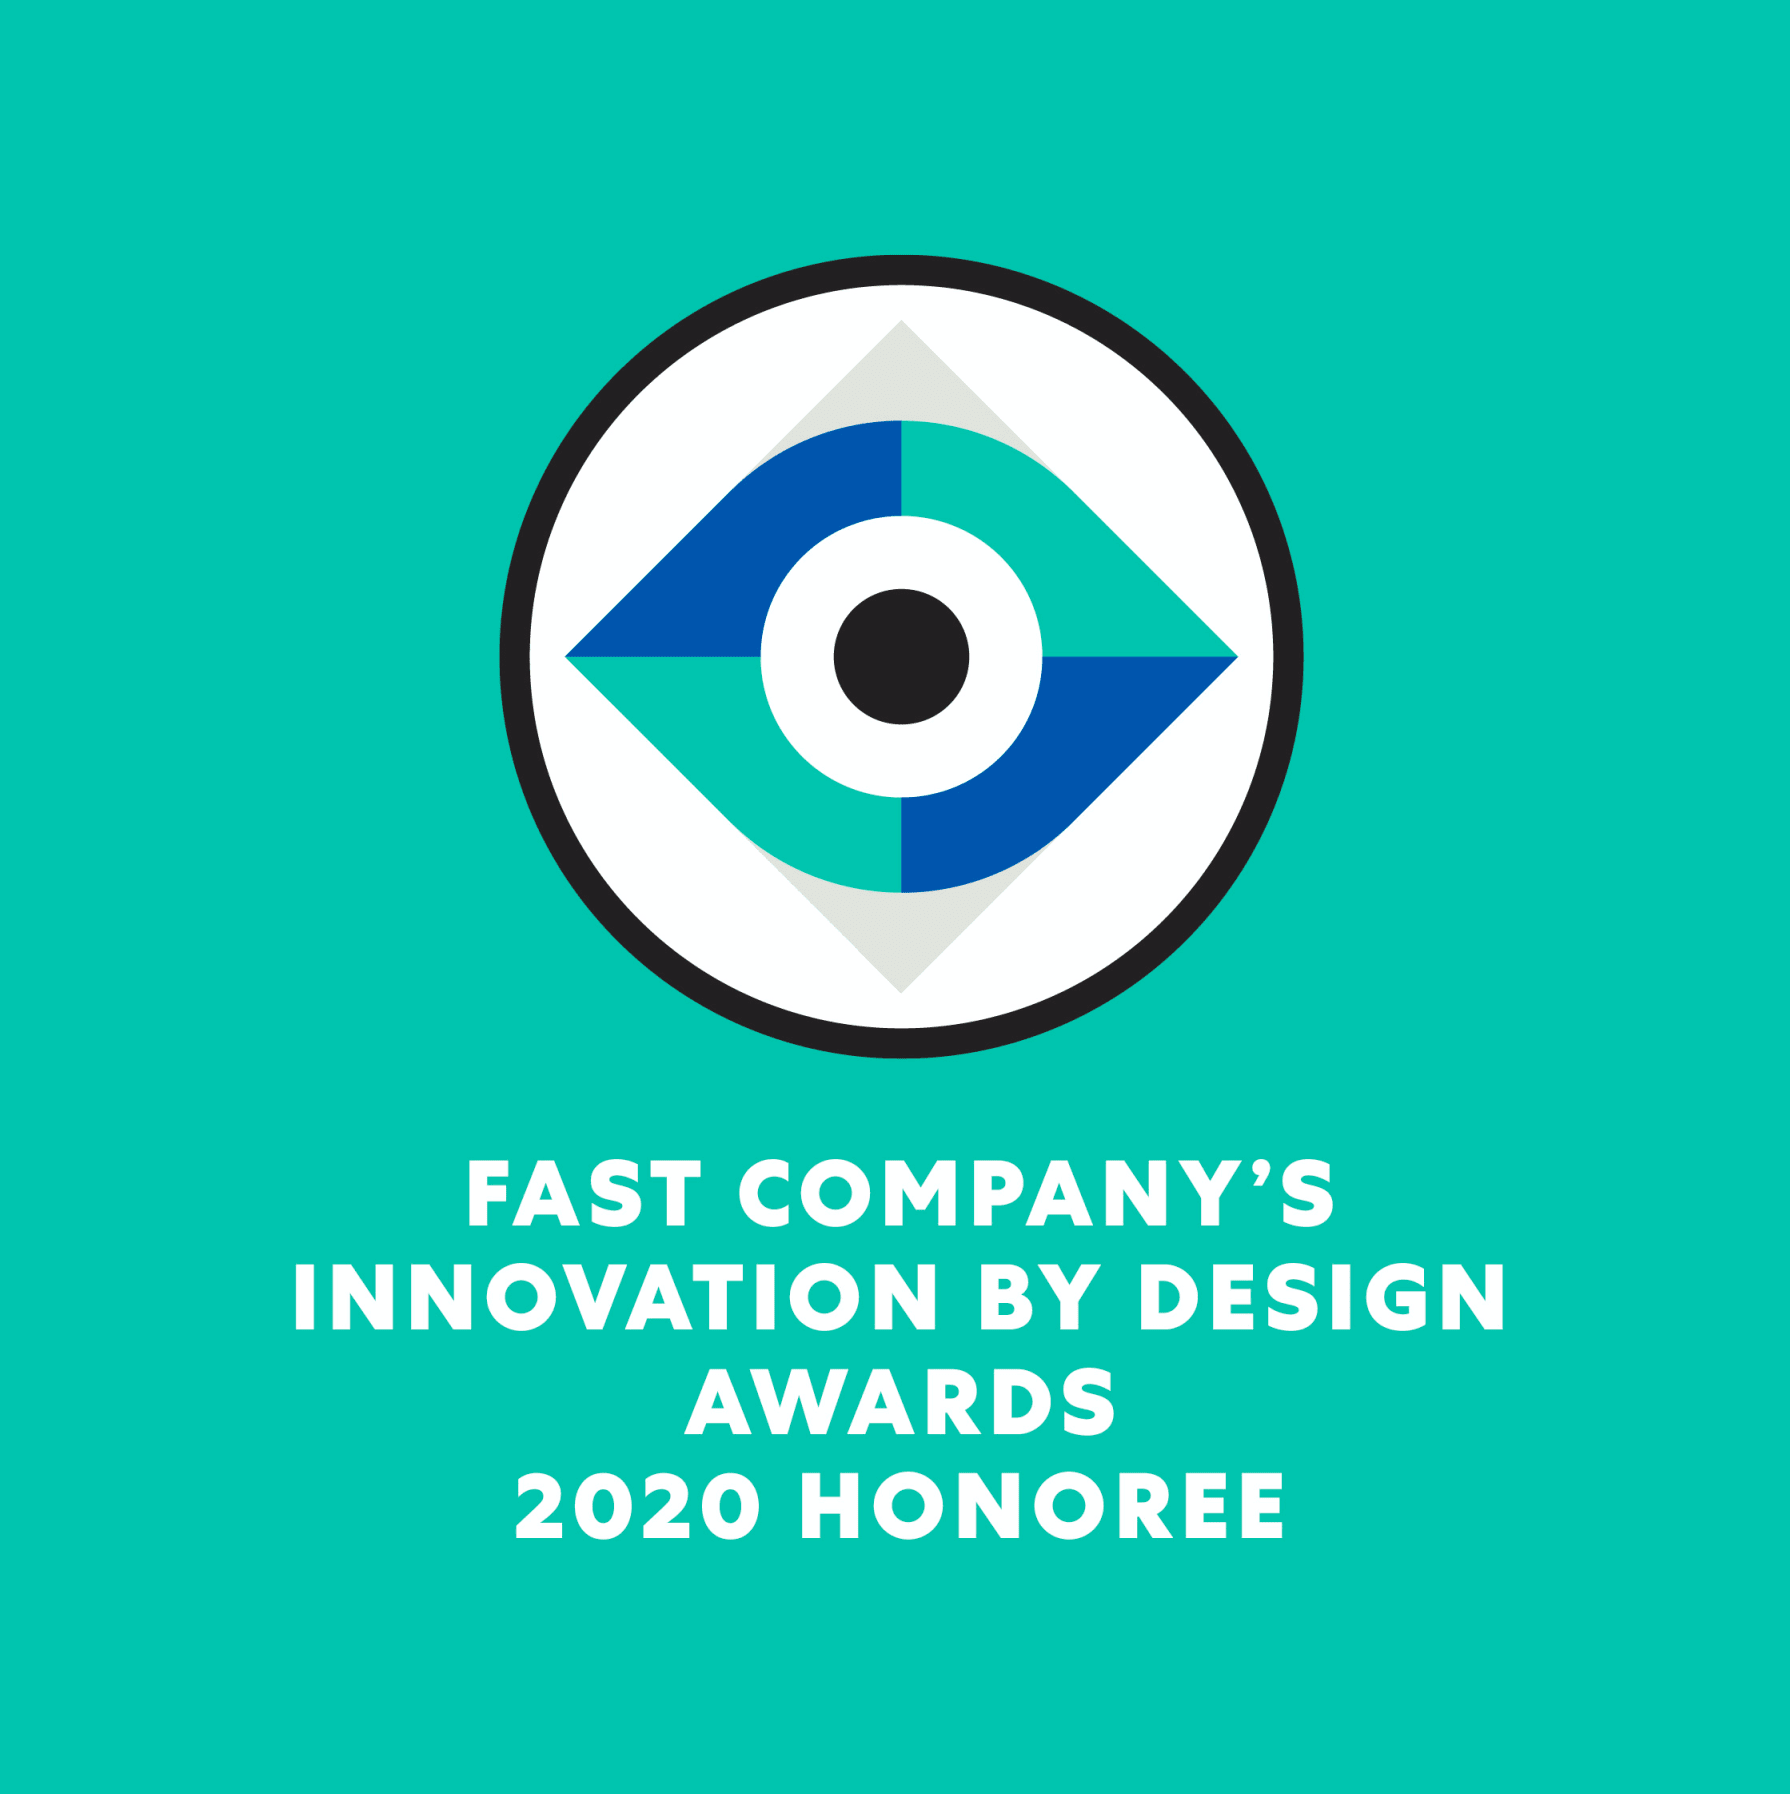 Fast Company Recognizes Carbon Partners Design for Innovation